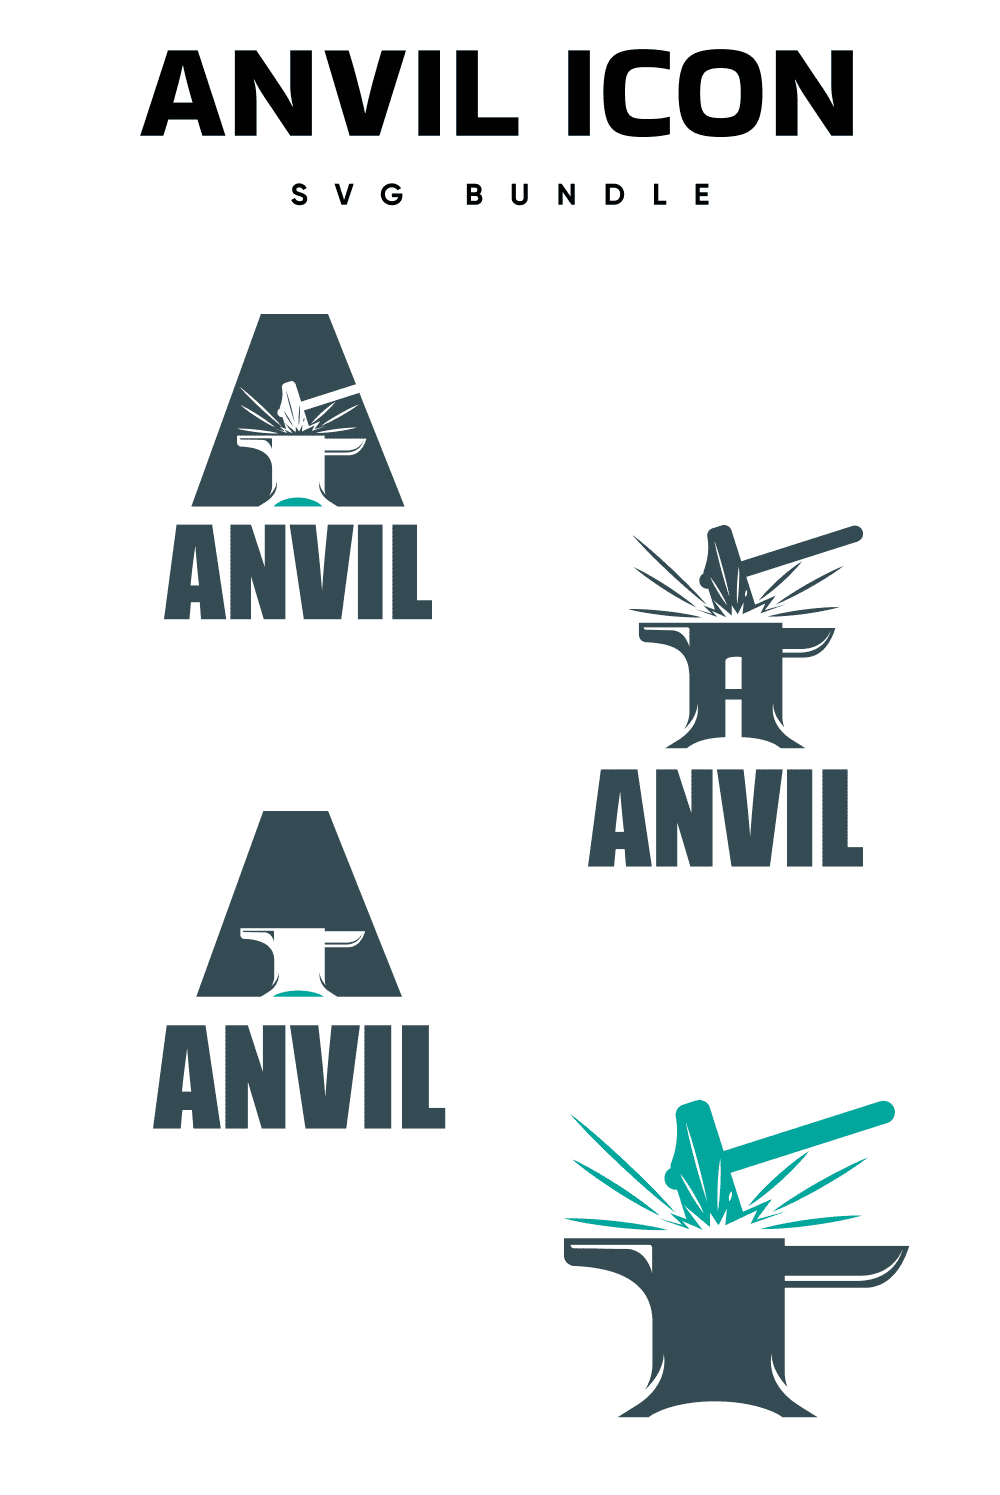 Four images of an anvil with the inscription "Anvil".